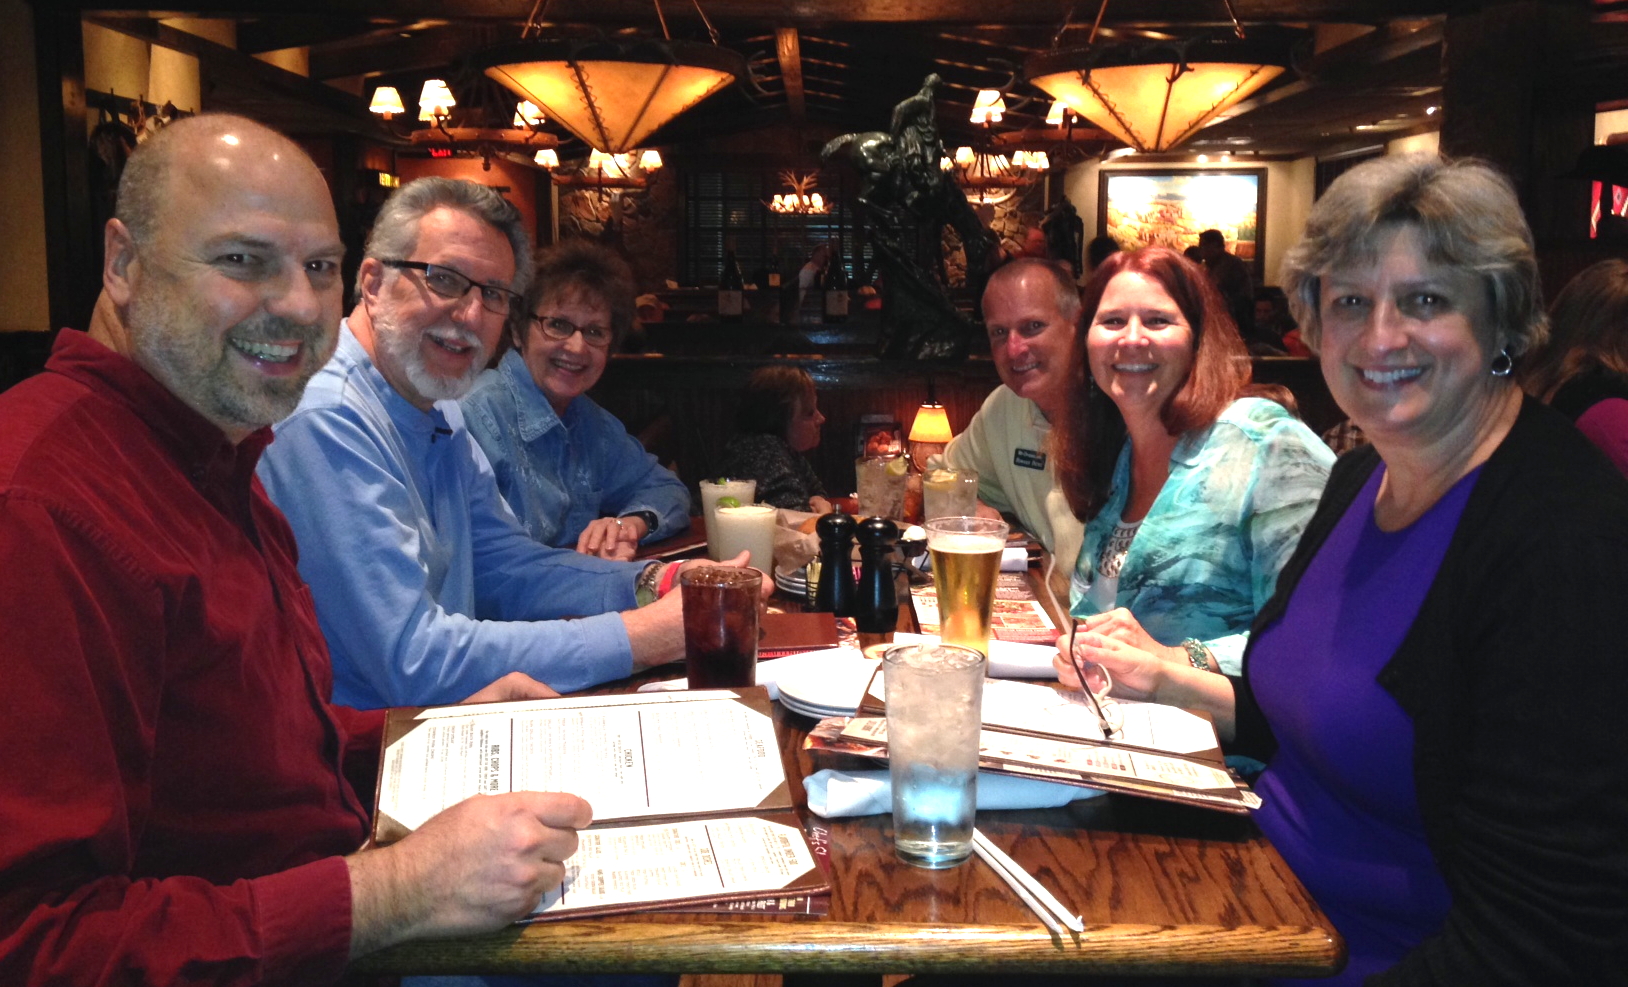 Dinner tonight at Longhorn Steakhouse in Pigeon Forge, TN - Nancy and I, Ken and Faye H and Howard and Linda P.